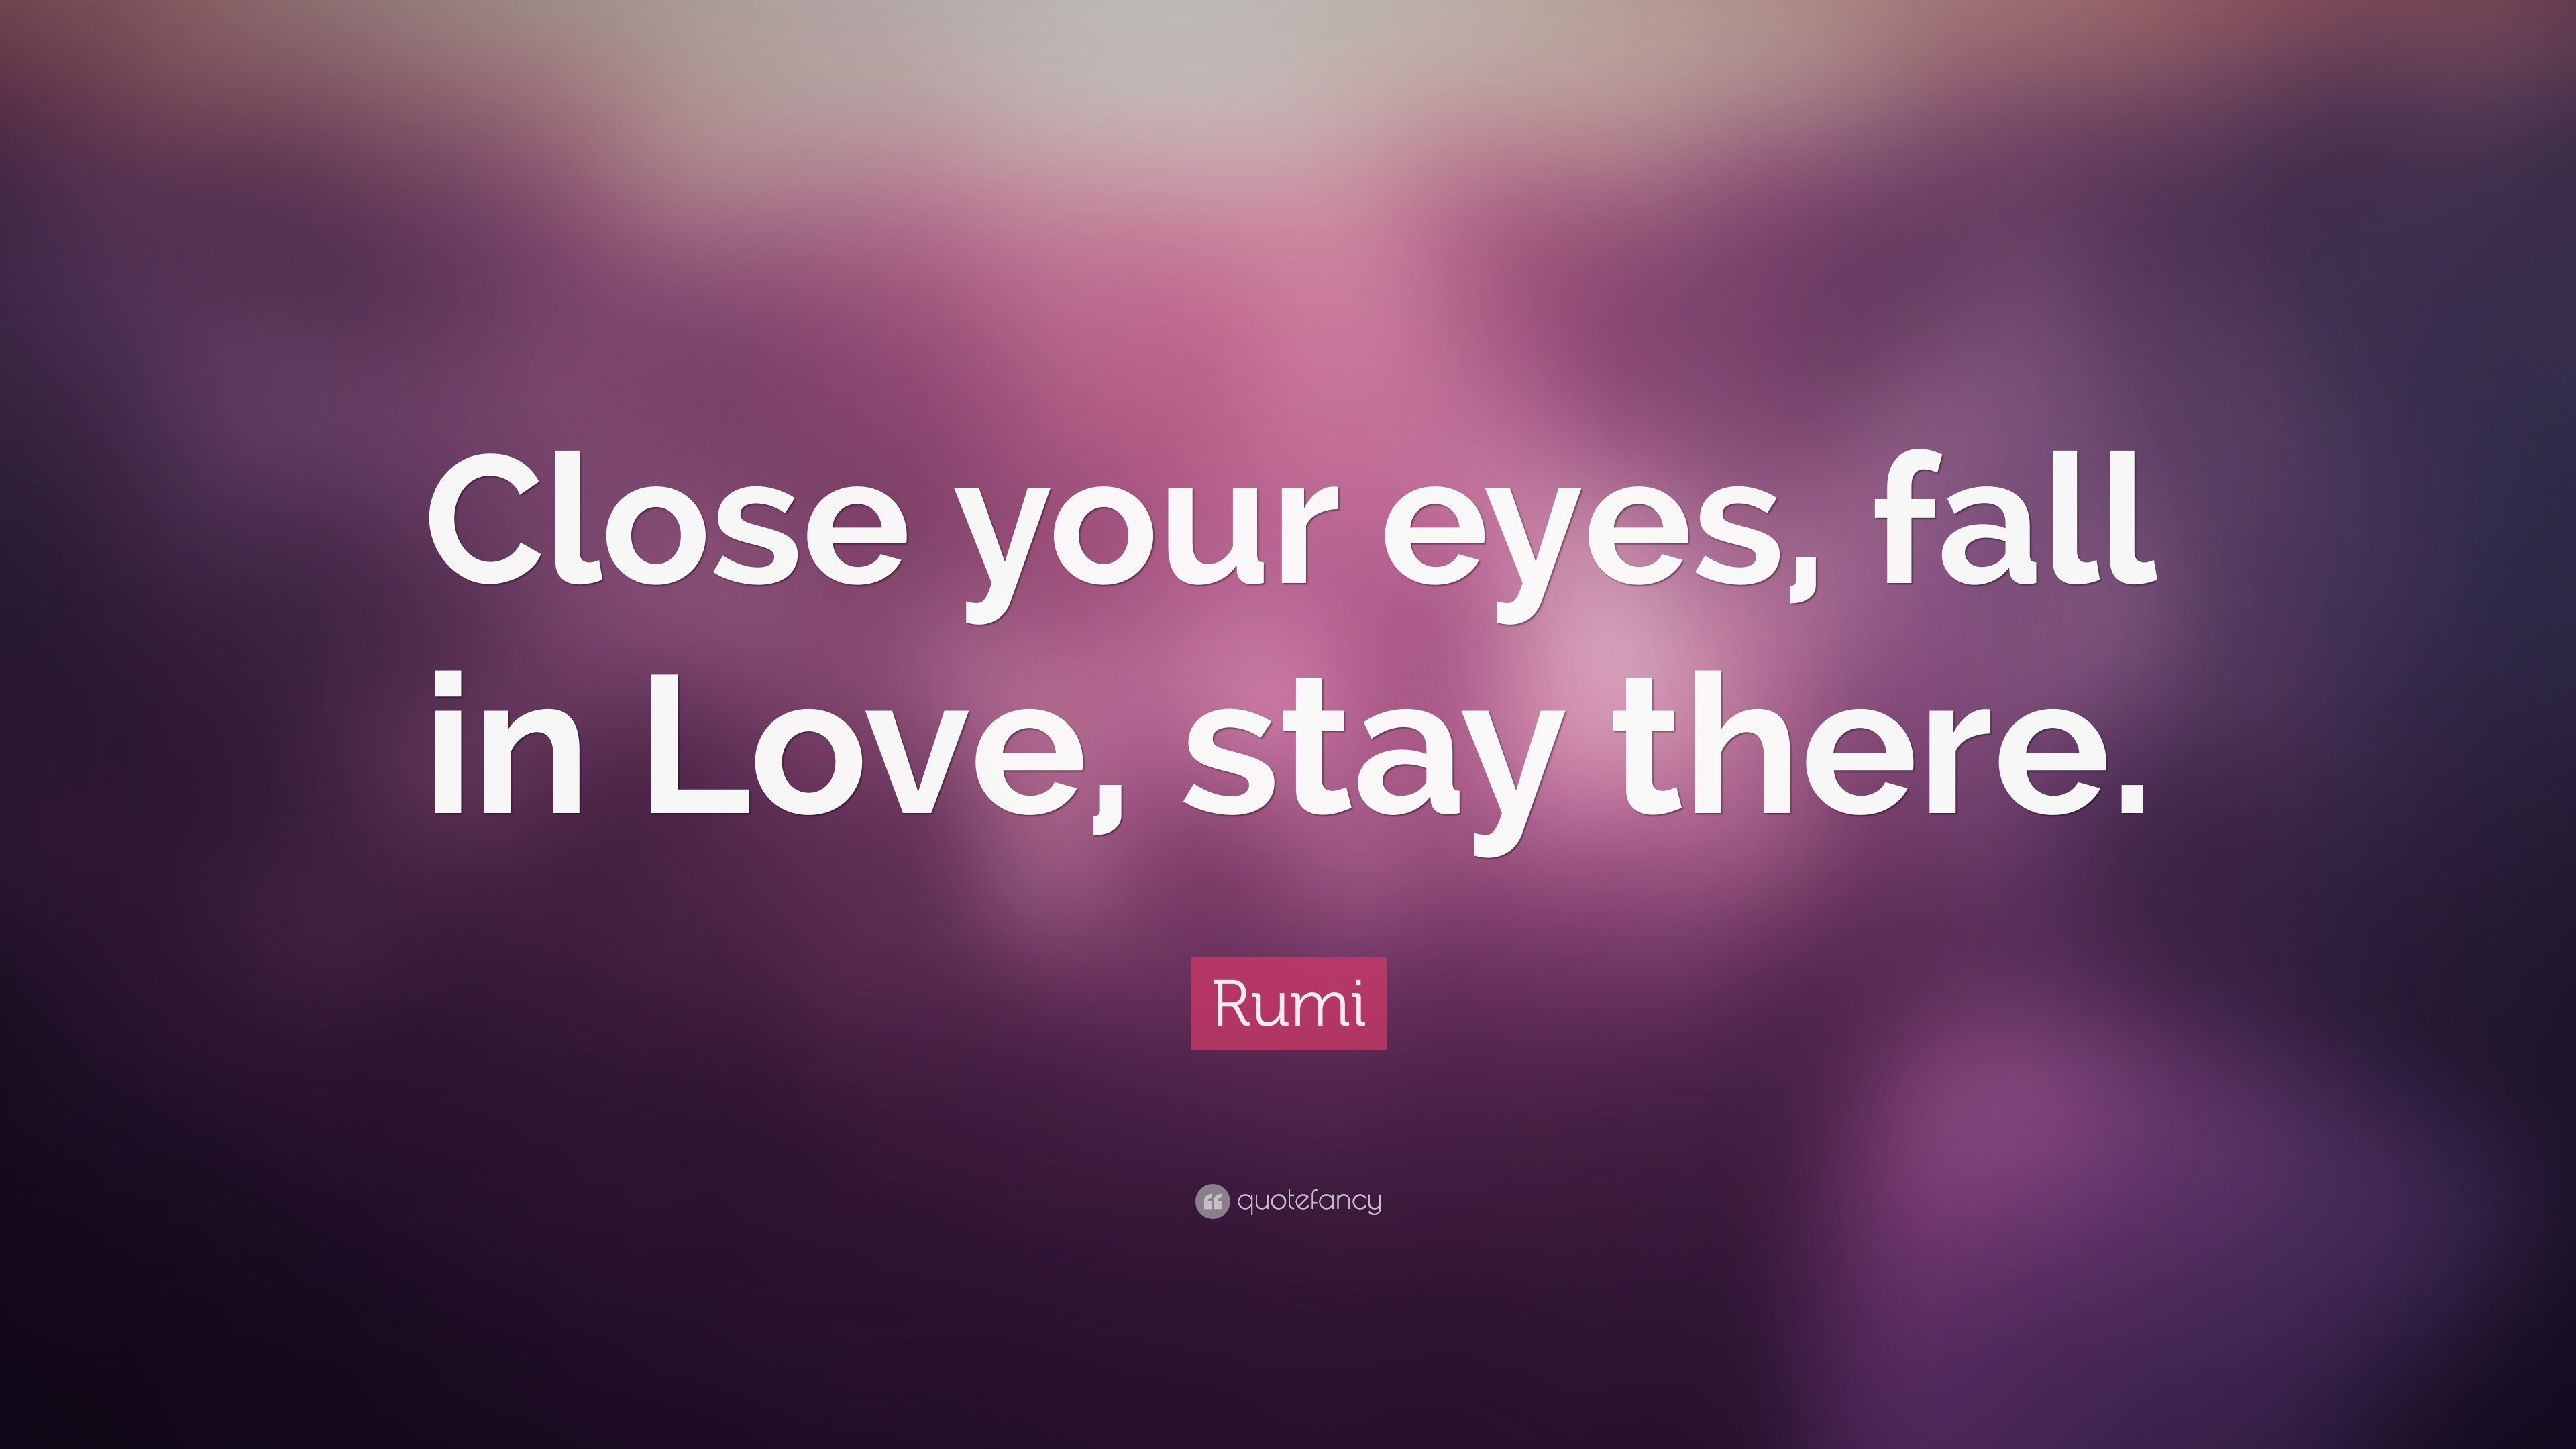 Rumi Quote “Close your eyes fall in Love stay there ”